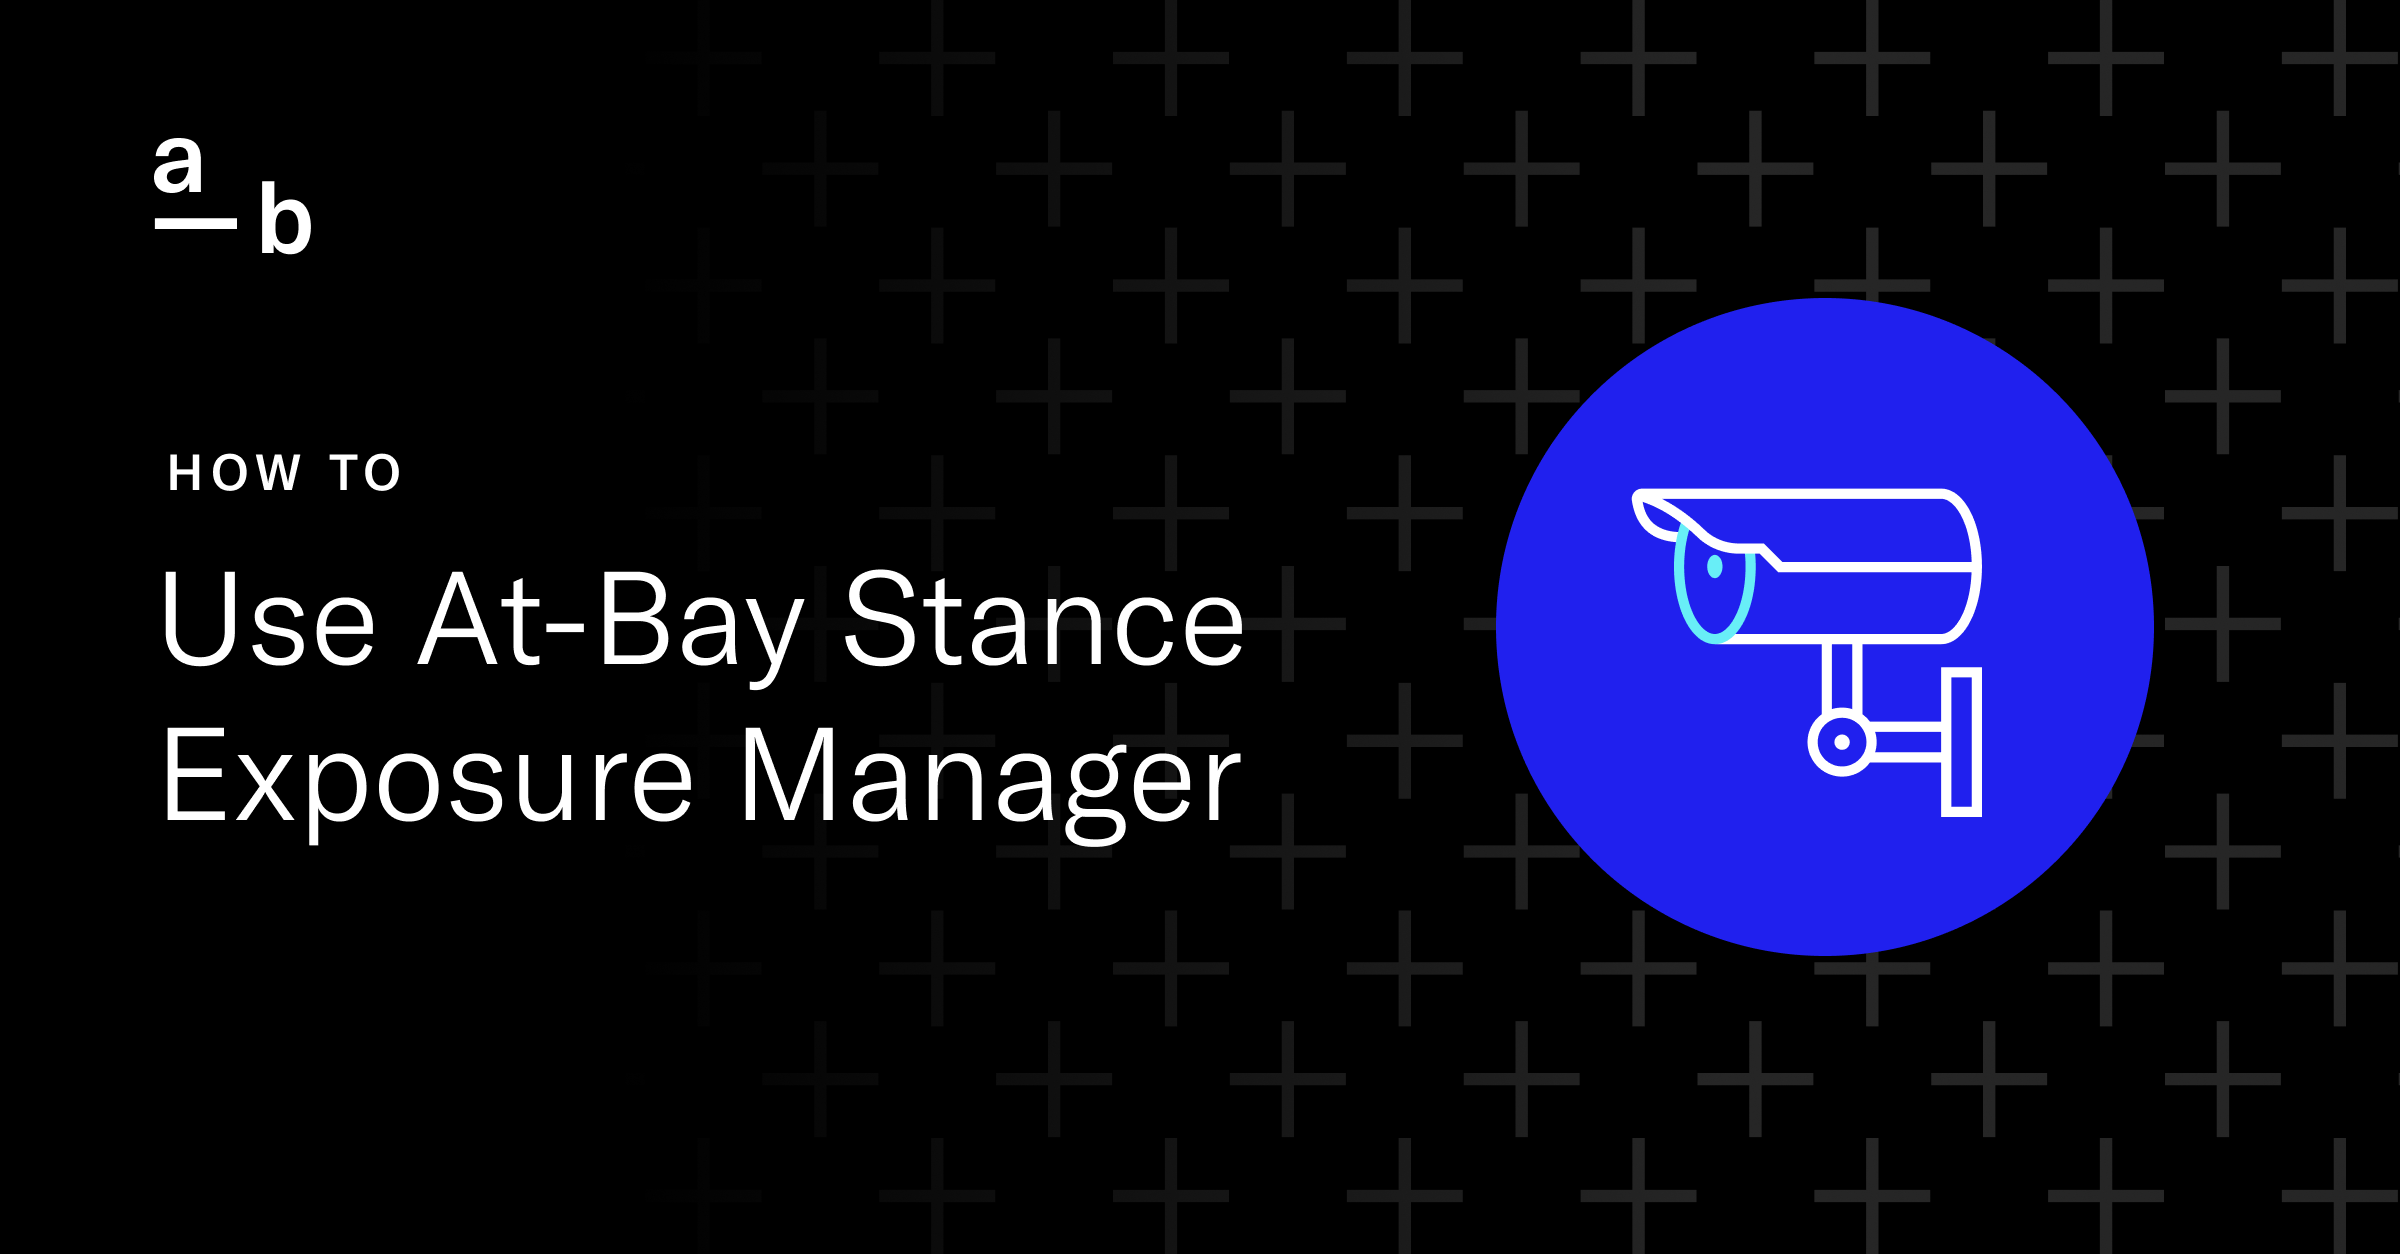 How to Use At-Bay Stance Exposure Manager